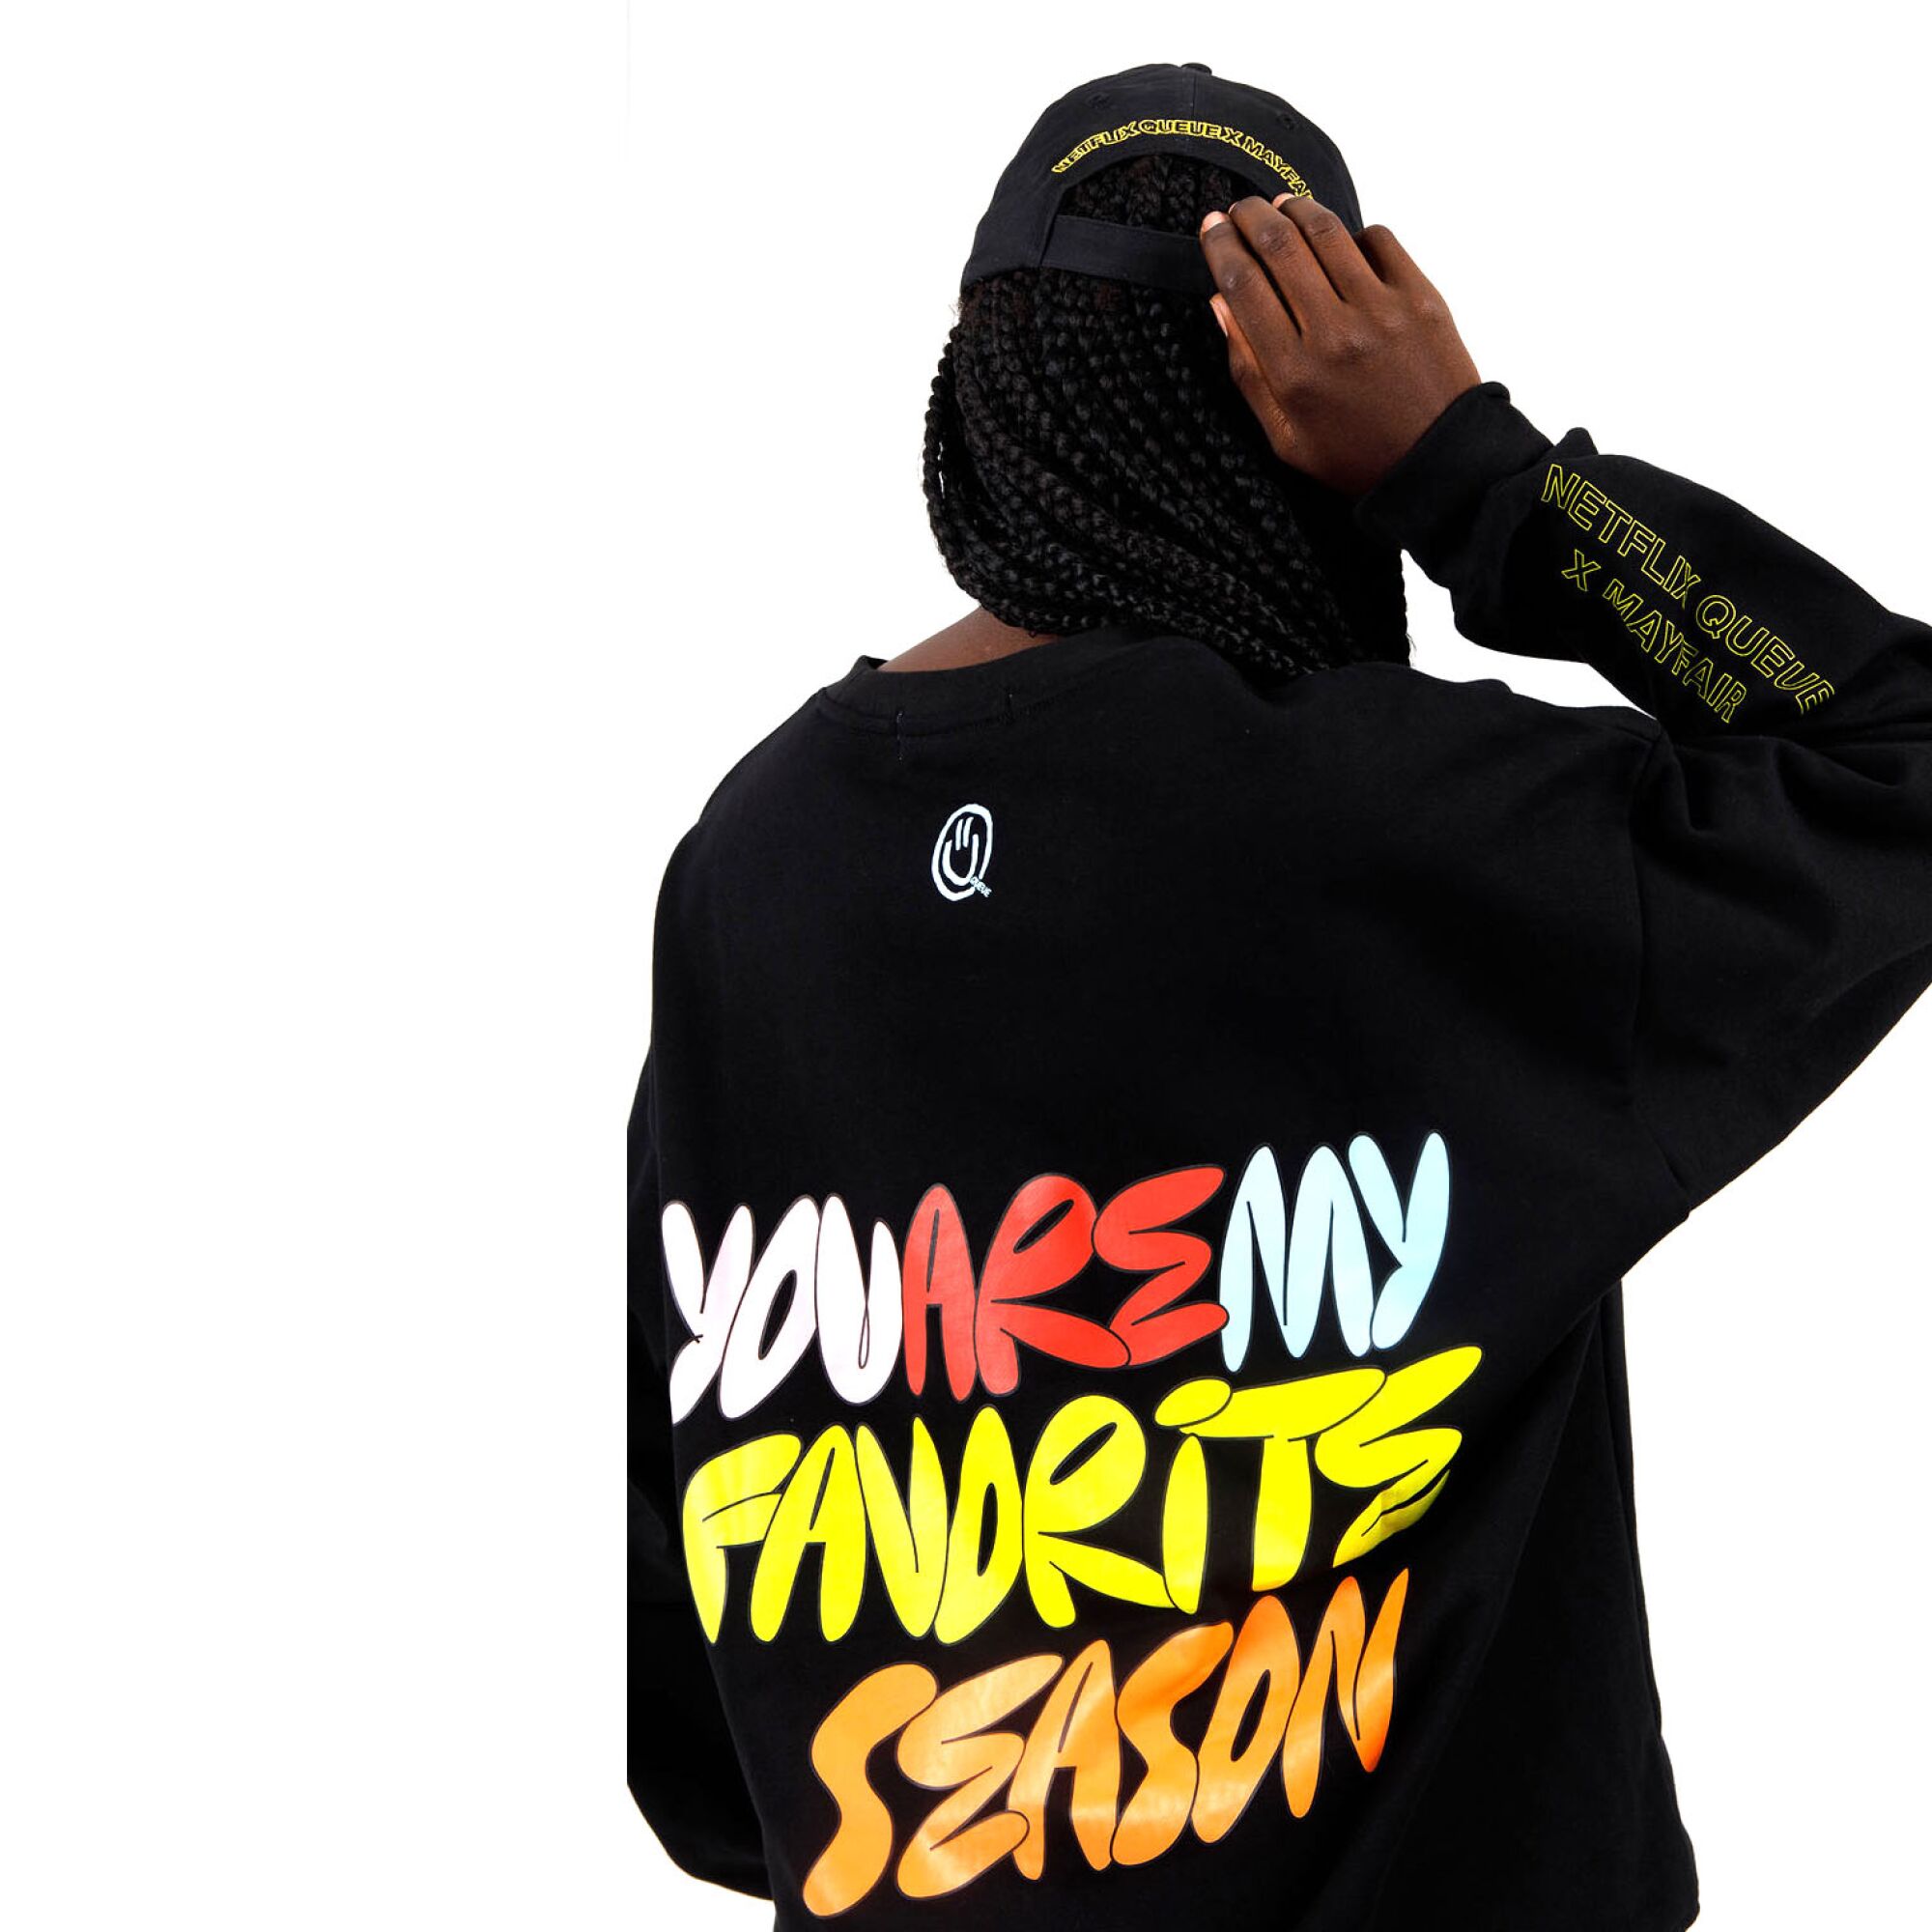 The back of a sweatshirt reads, "You are my favorite season."